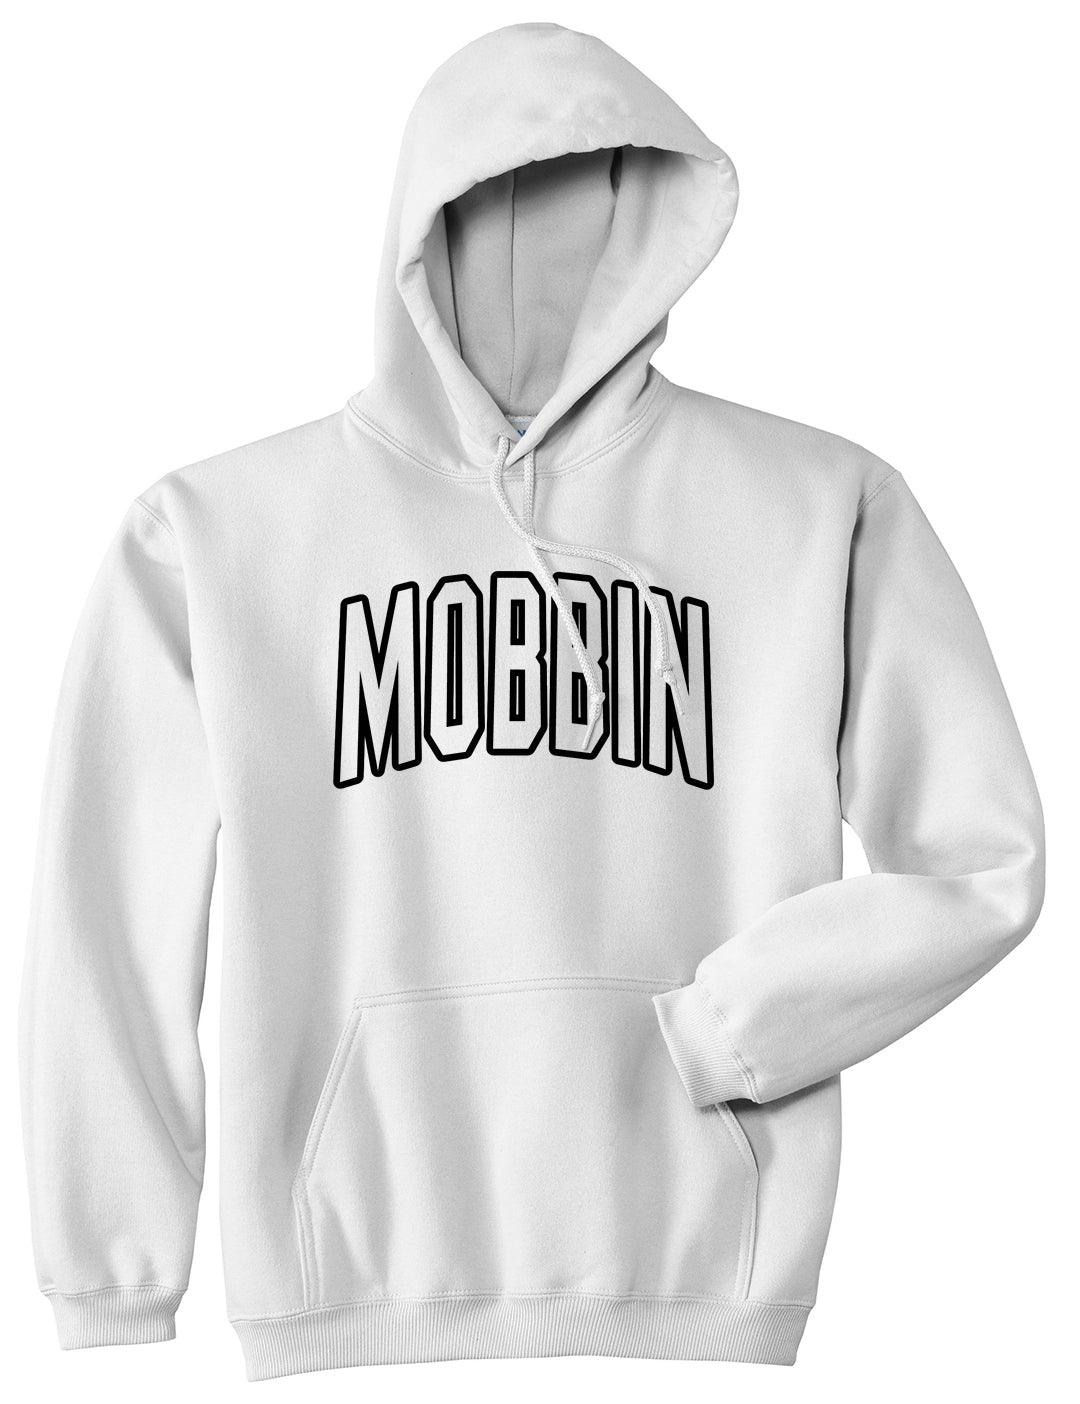 Mobbin Outline Squad Mens Pullover Hoodie White by Kings Of NY